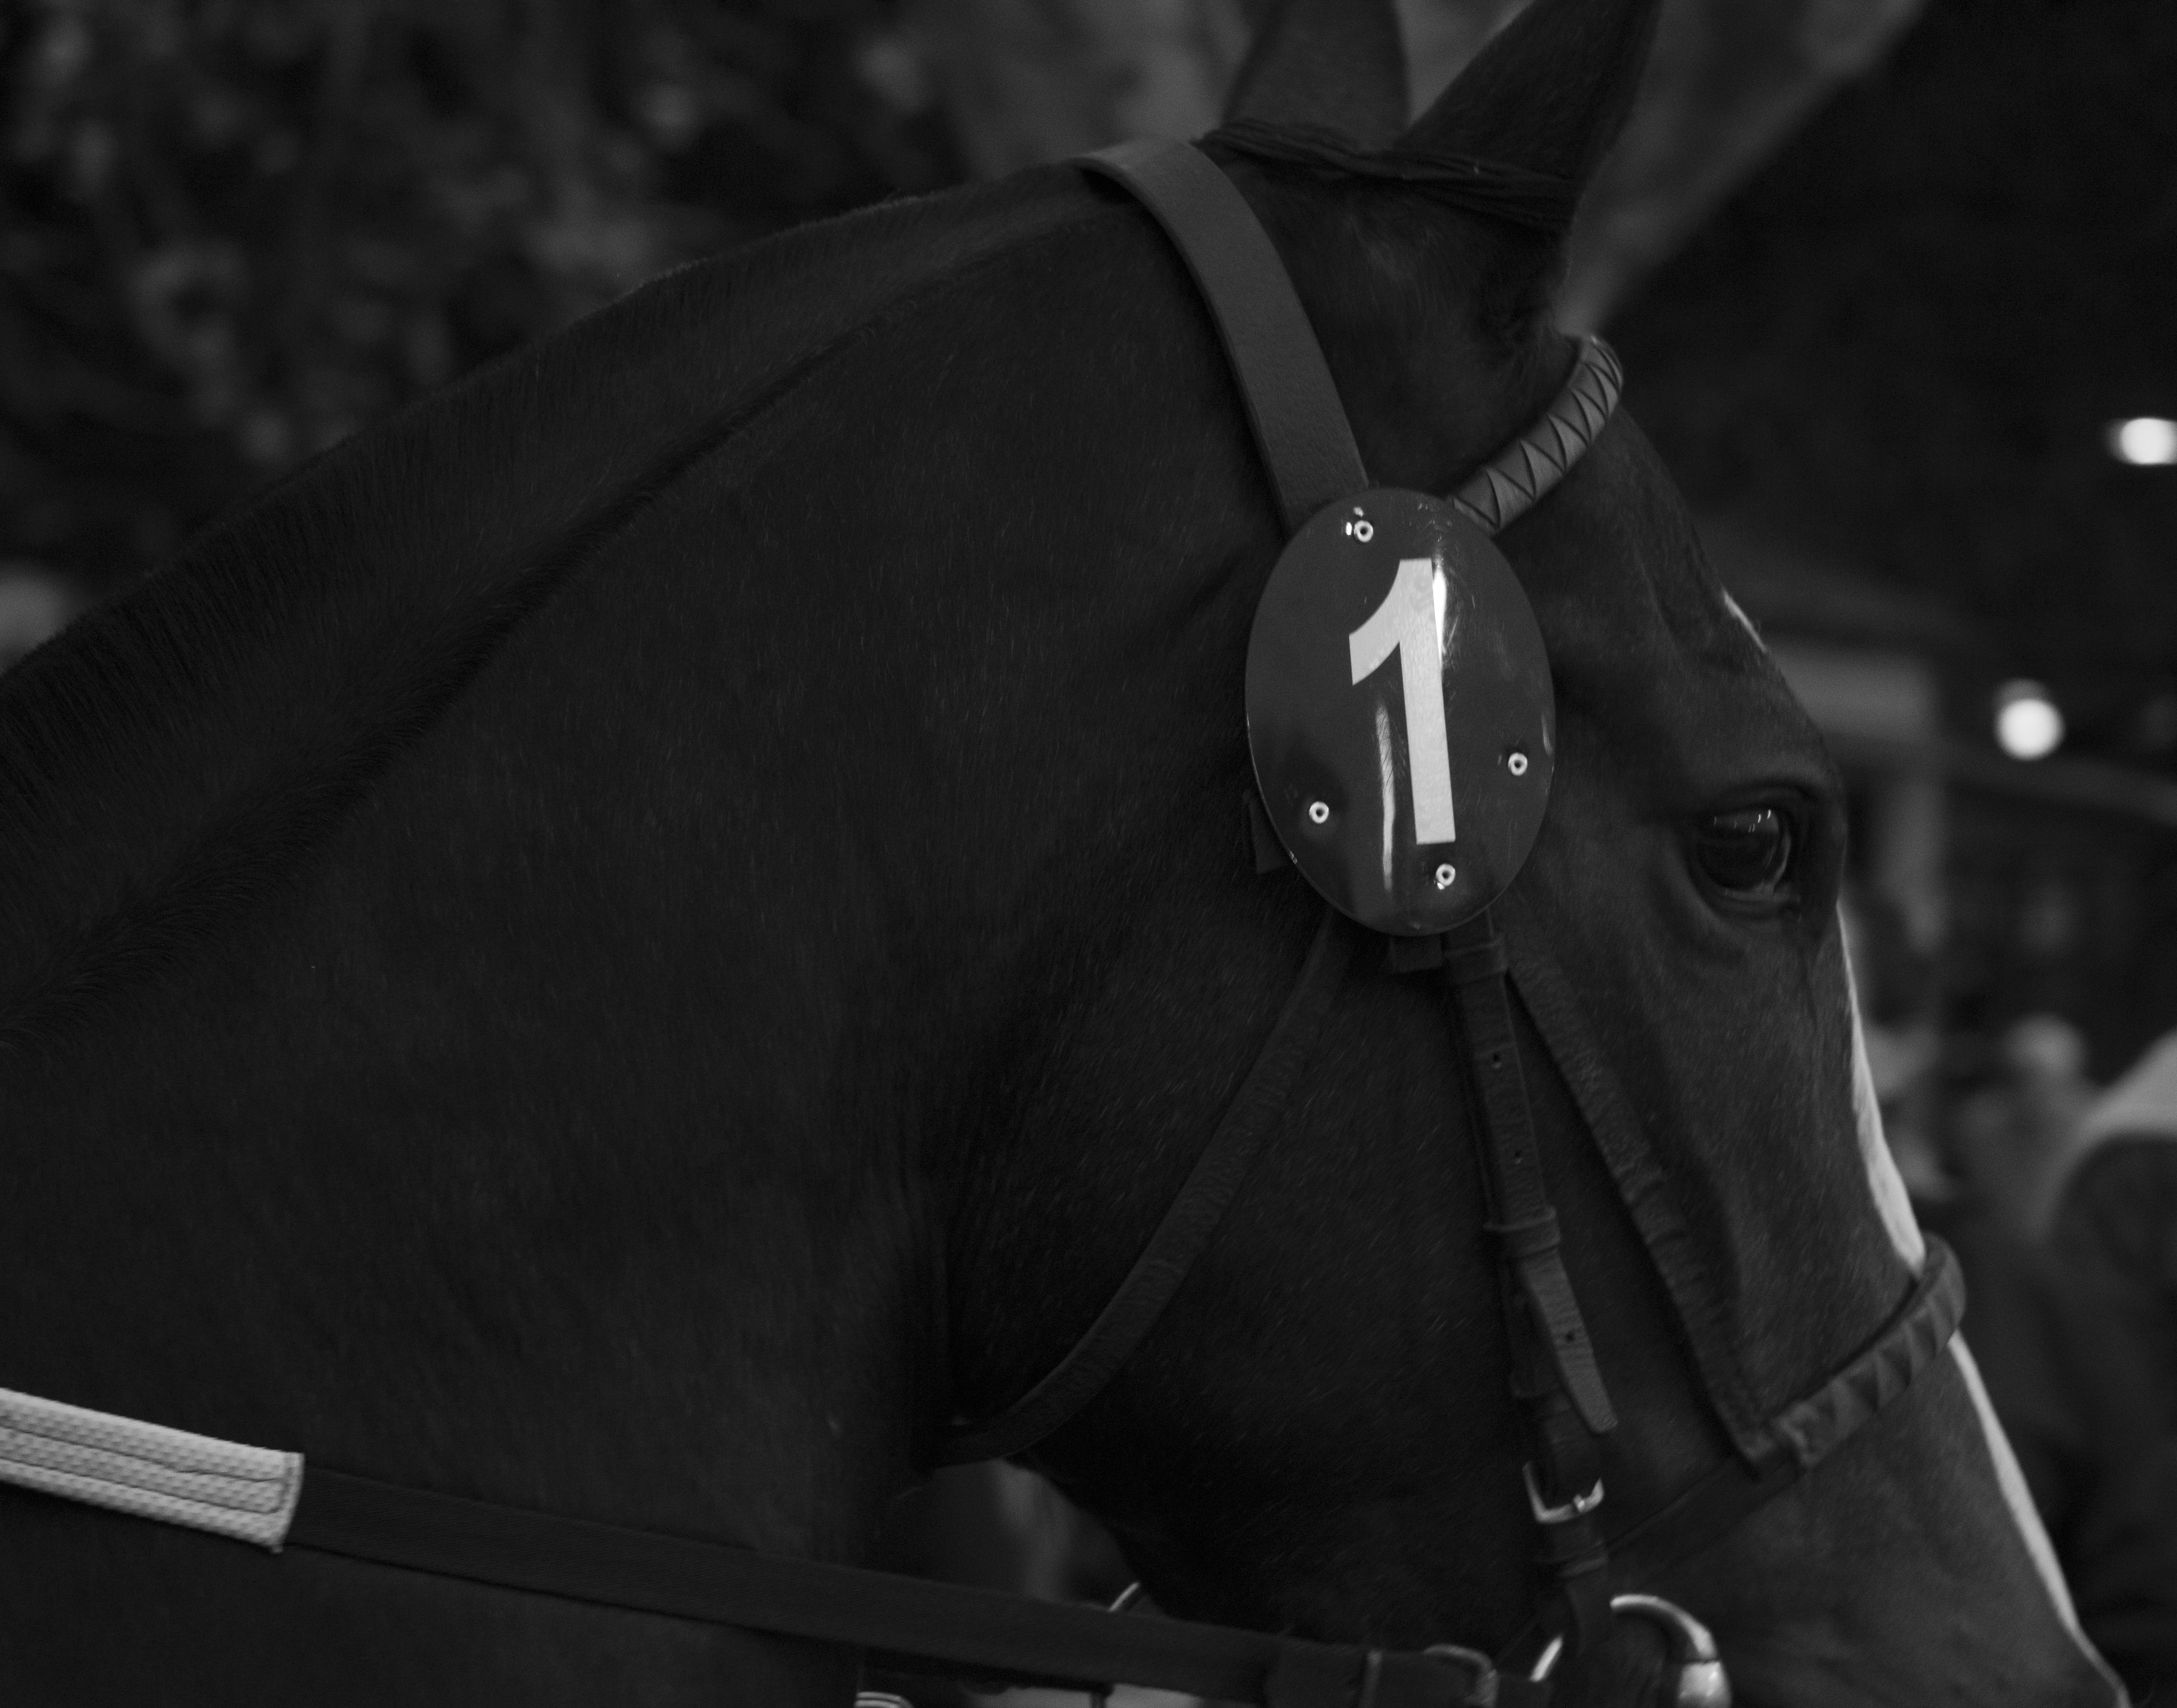 General 5099x4000 horse monochrome animals numbers